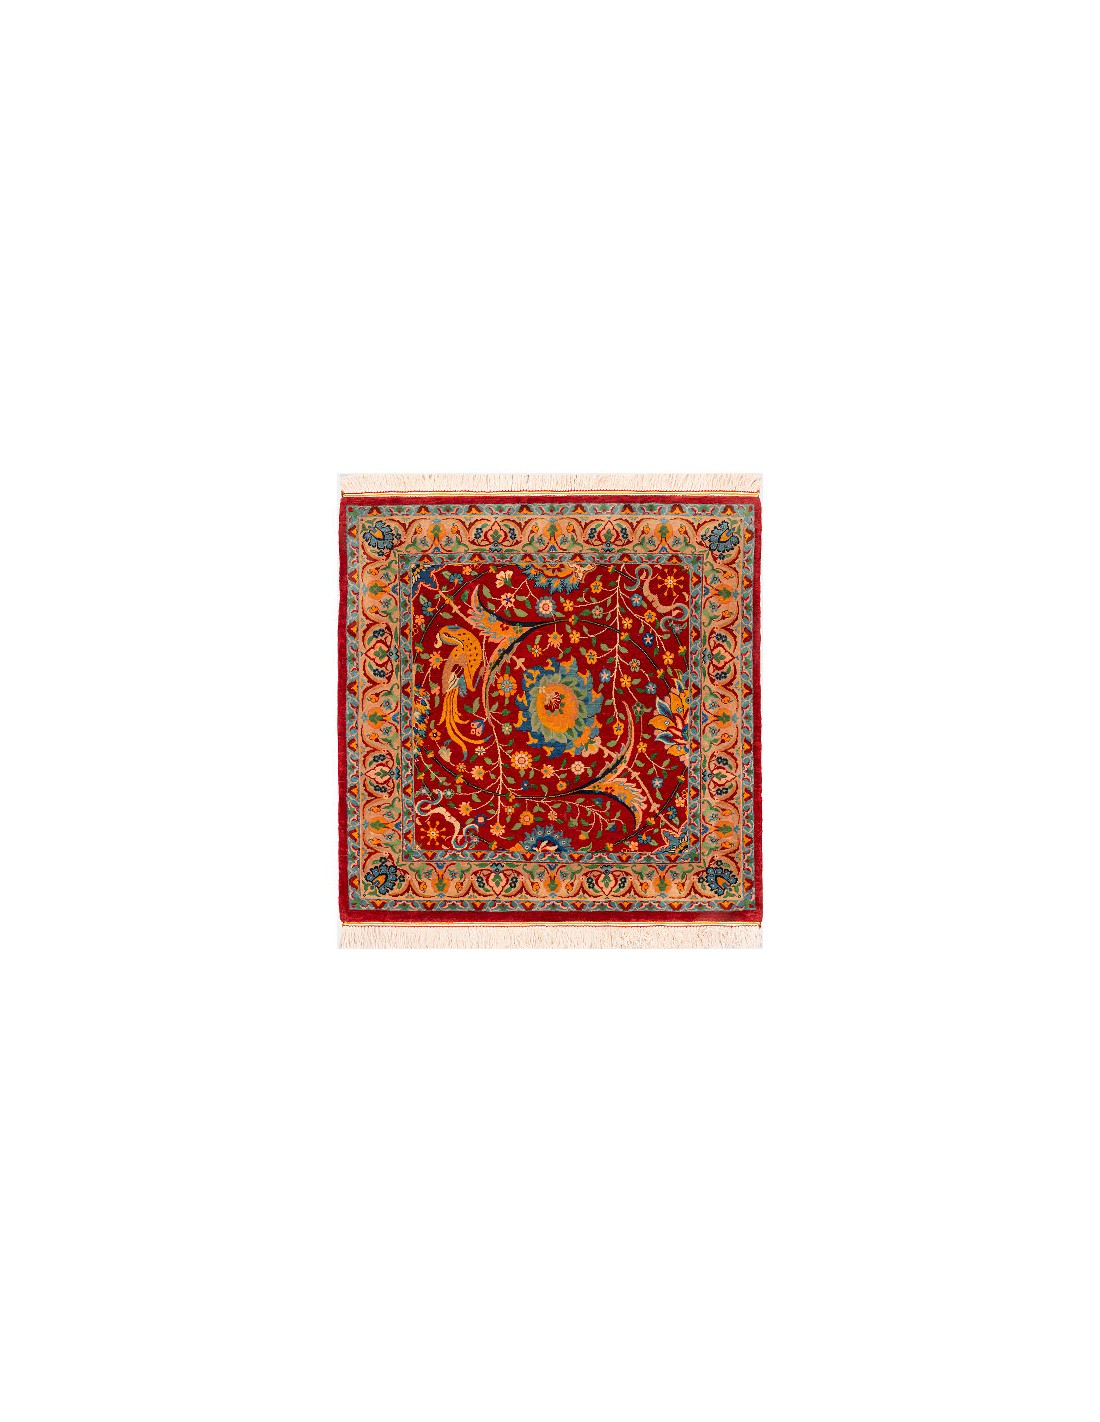 Quality Persian Rug & Carpet gallery with variety of Carpet textures